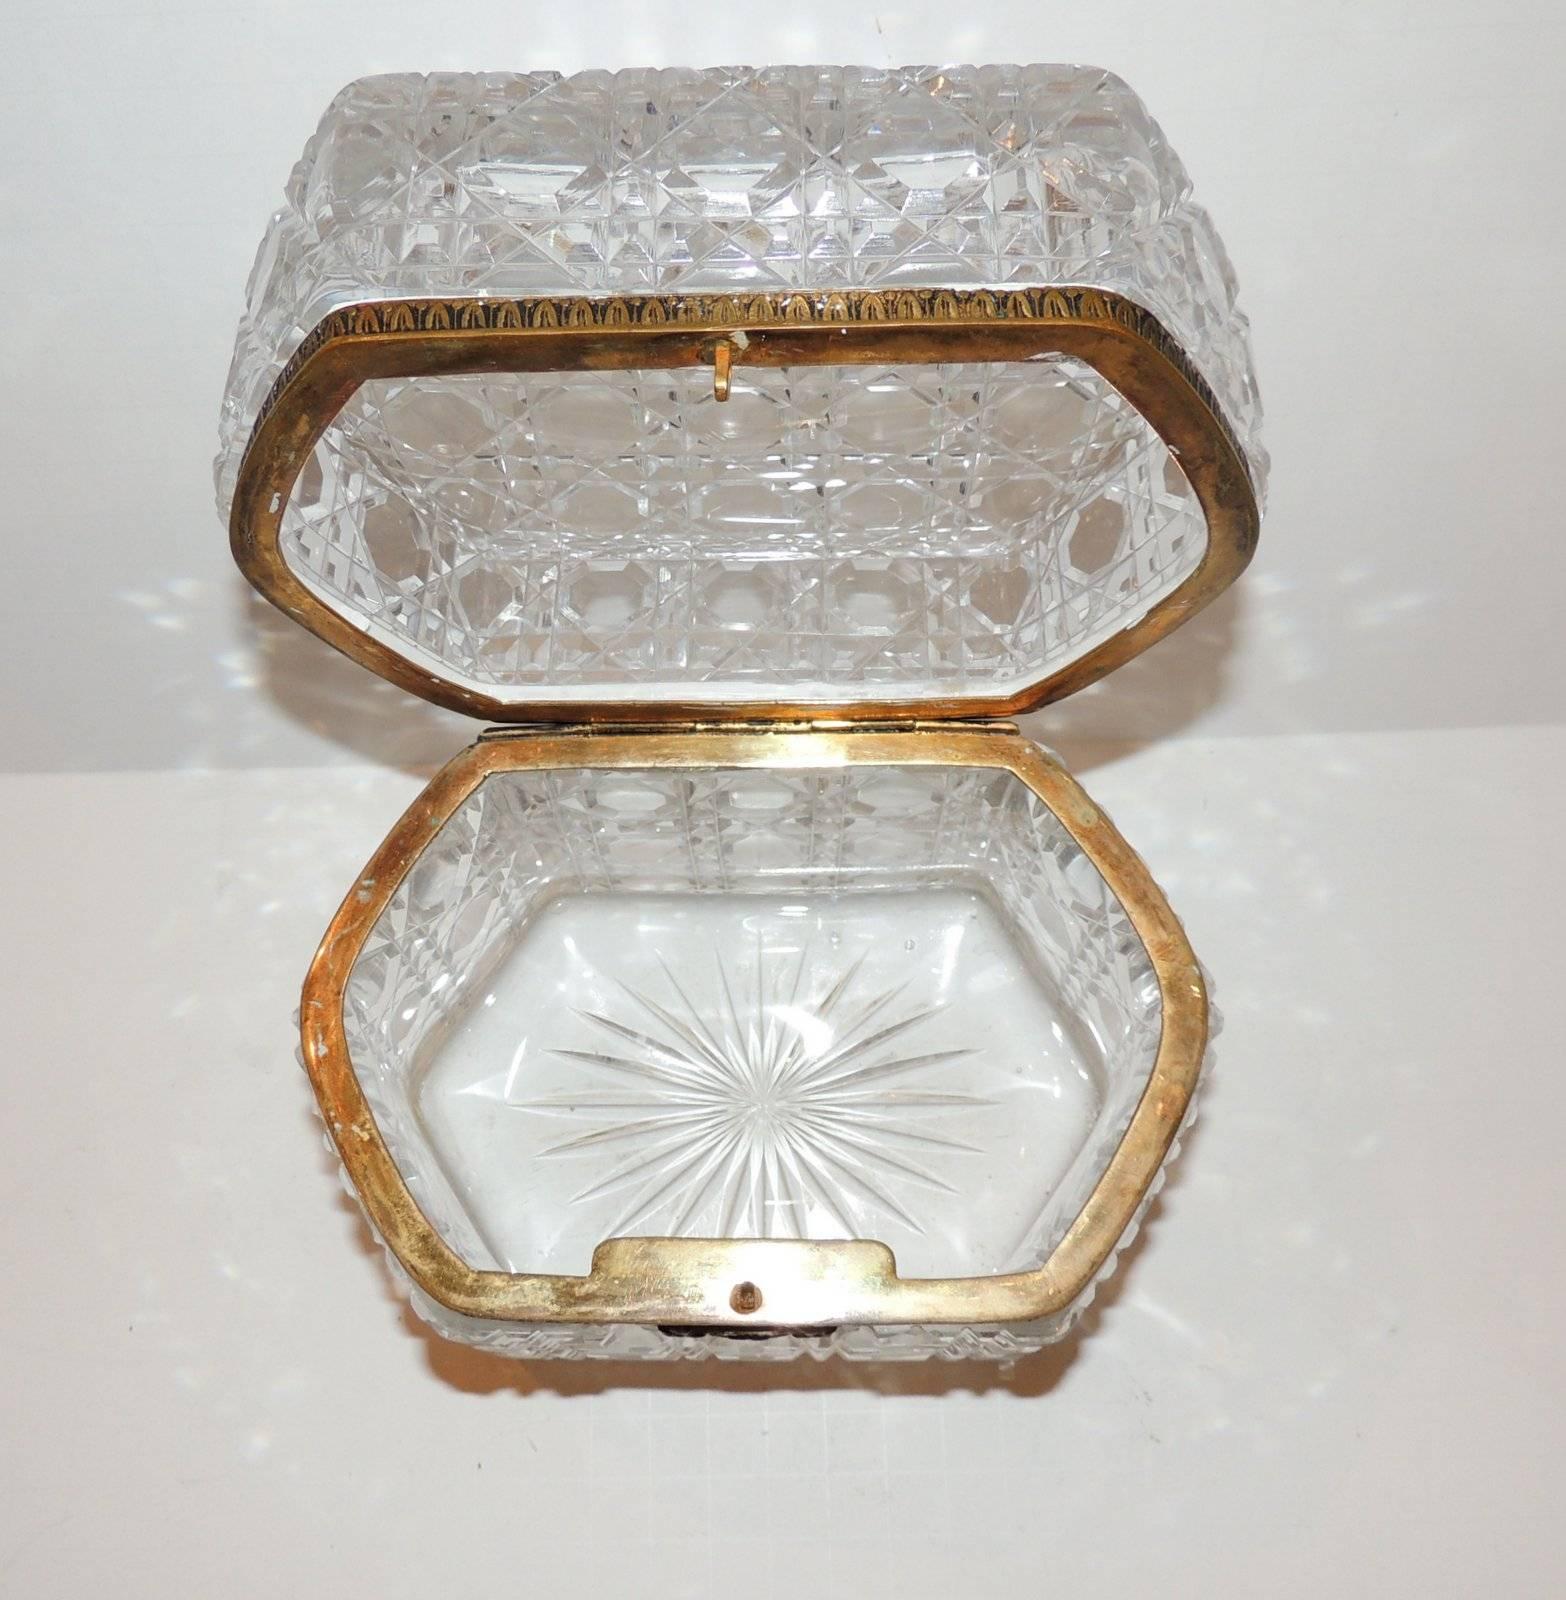 Wonderful French Faceted Cut Crystal Bronze Ormolu-Mounted Casket Jewelry Box 3